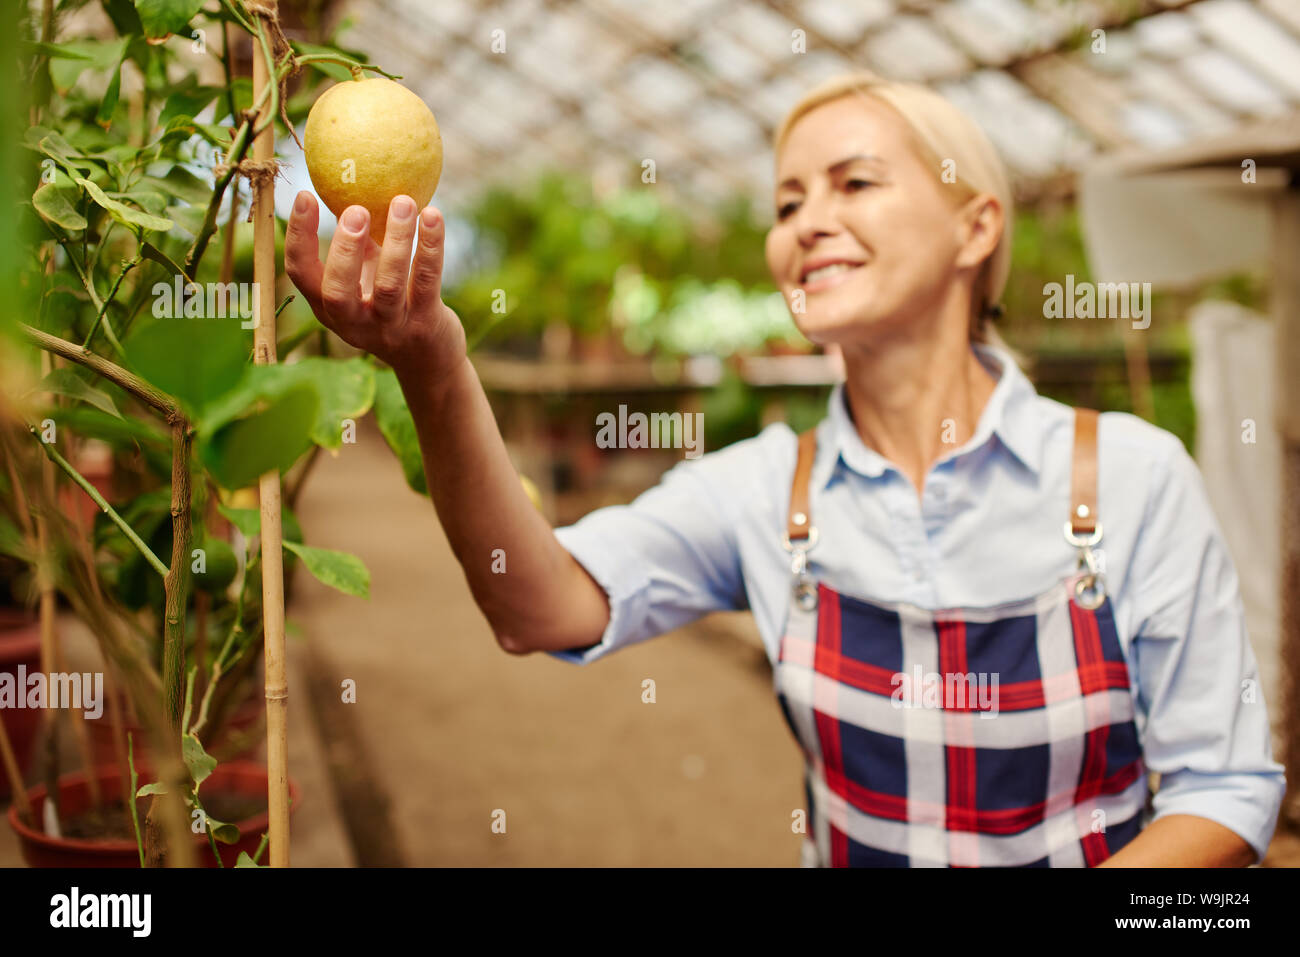 Farmer smiles while holding fruit she grows in the greenhouse. Stock Photo